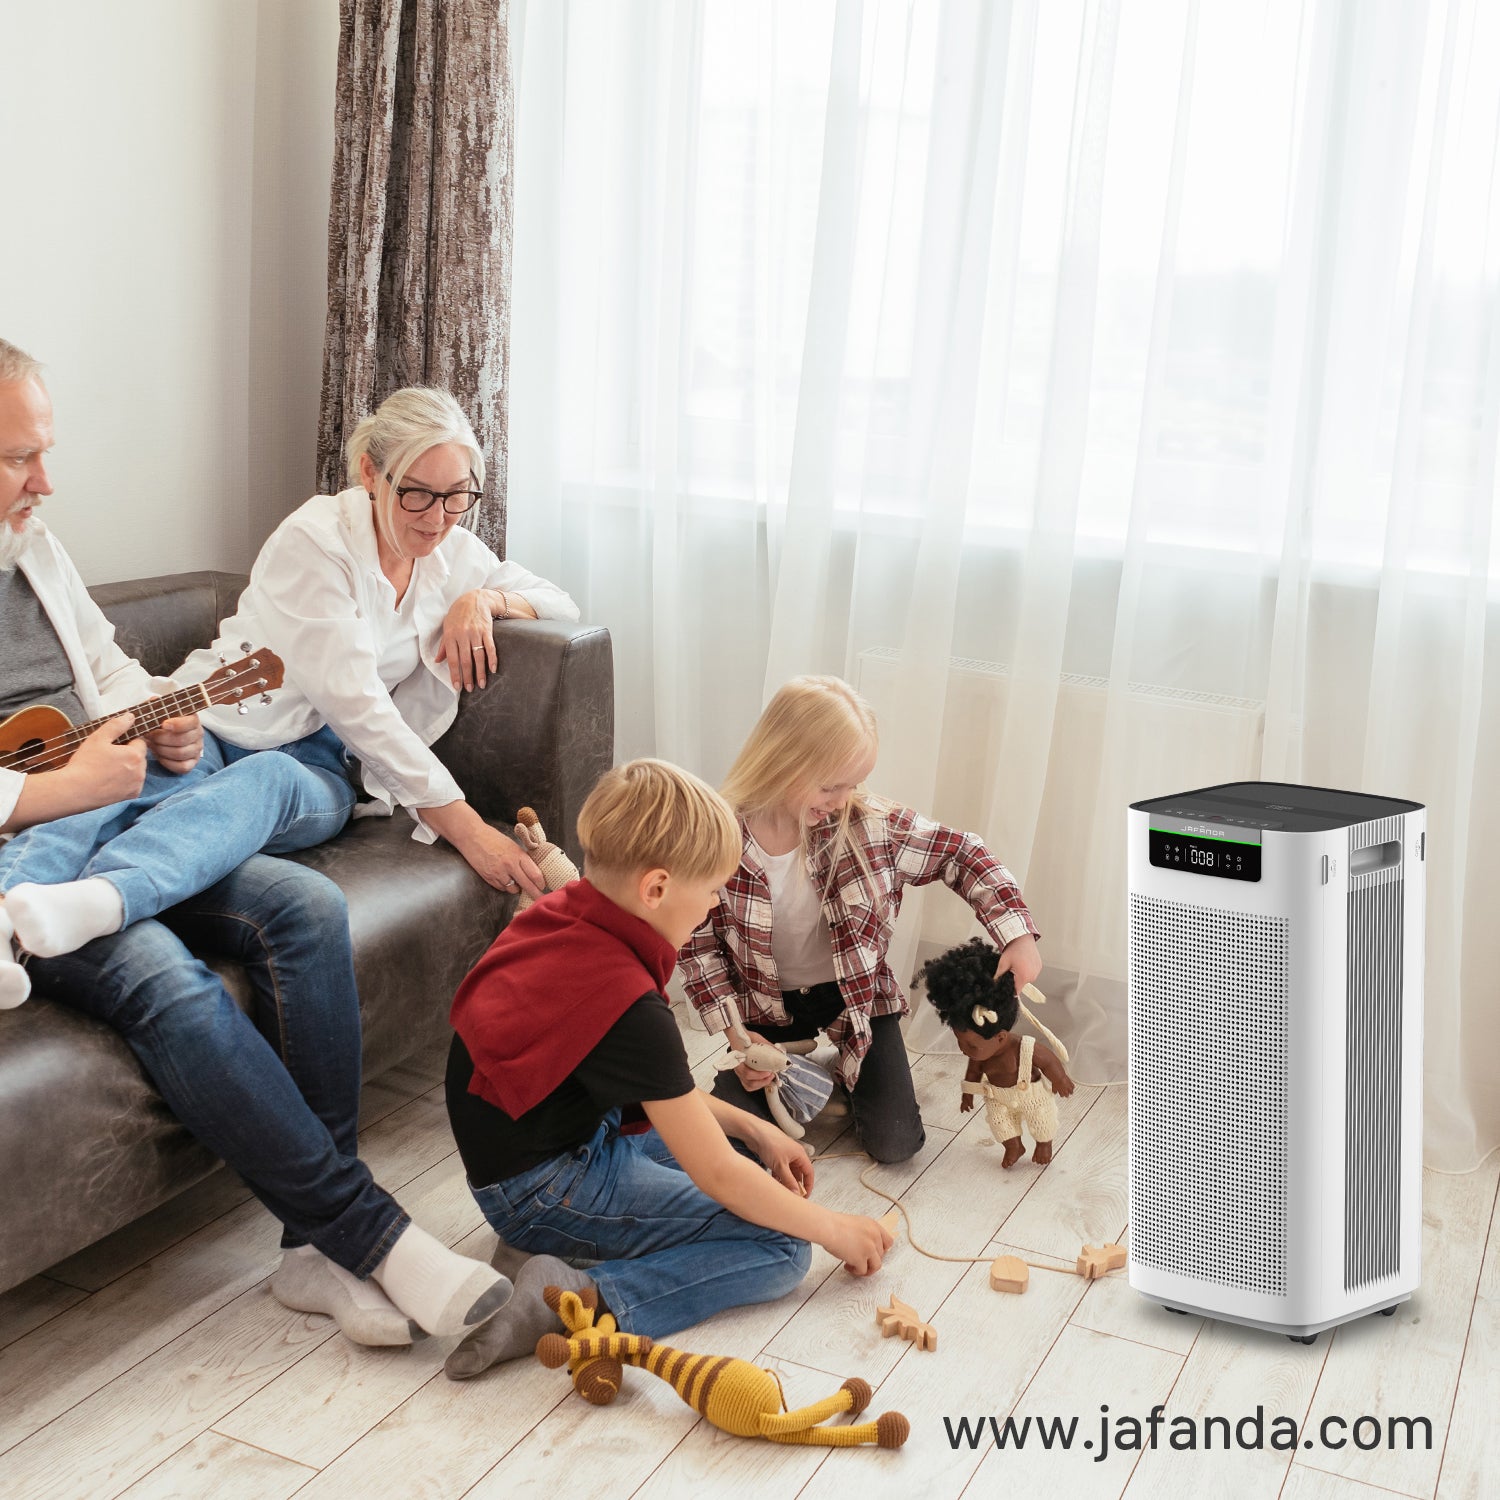 Don't Let Wildfire Smoke Spoil Your Summer: Breathe Easy with Jafanda Air Purifiers